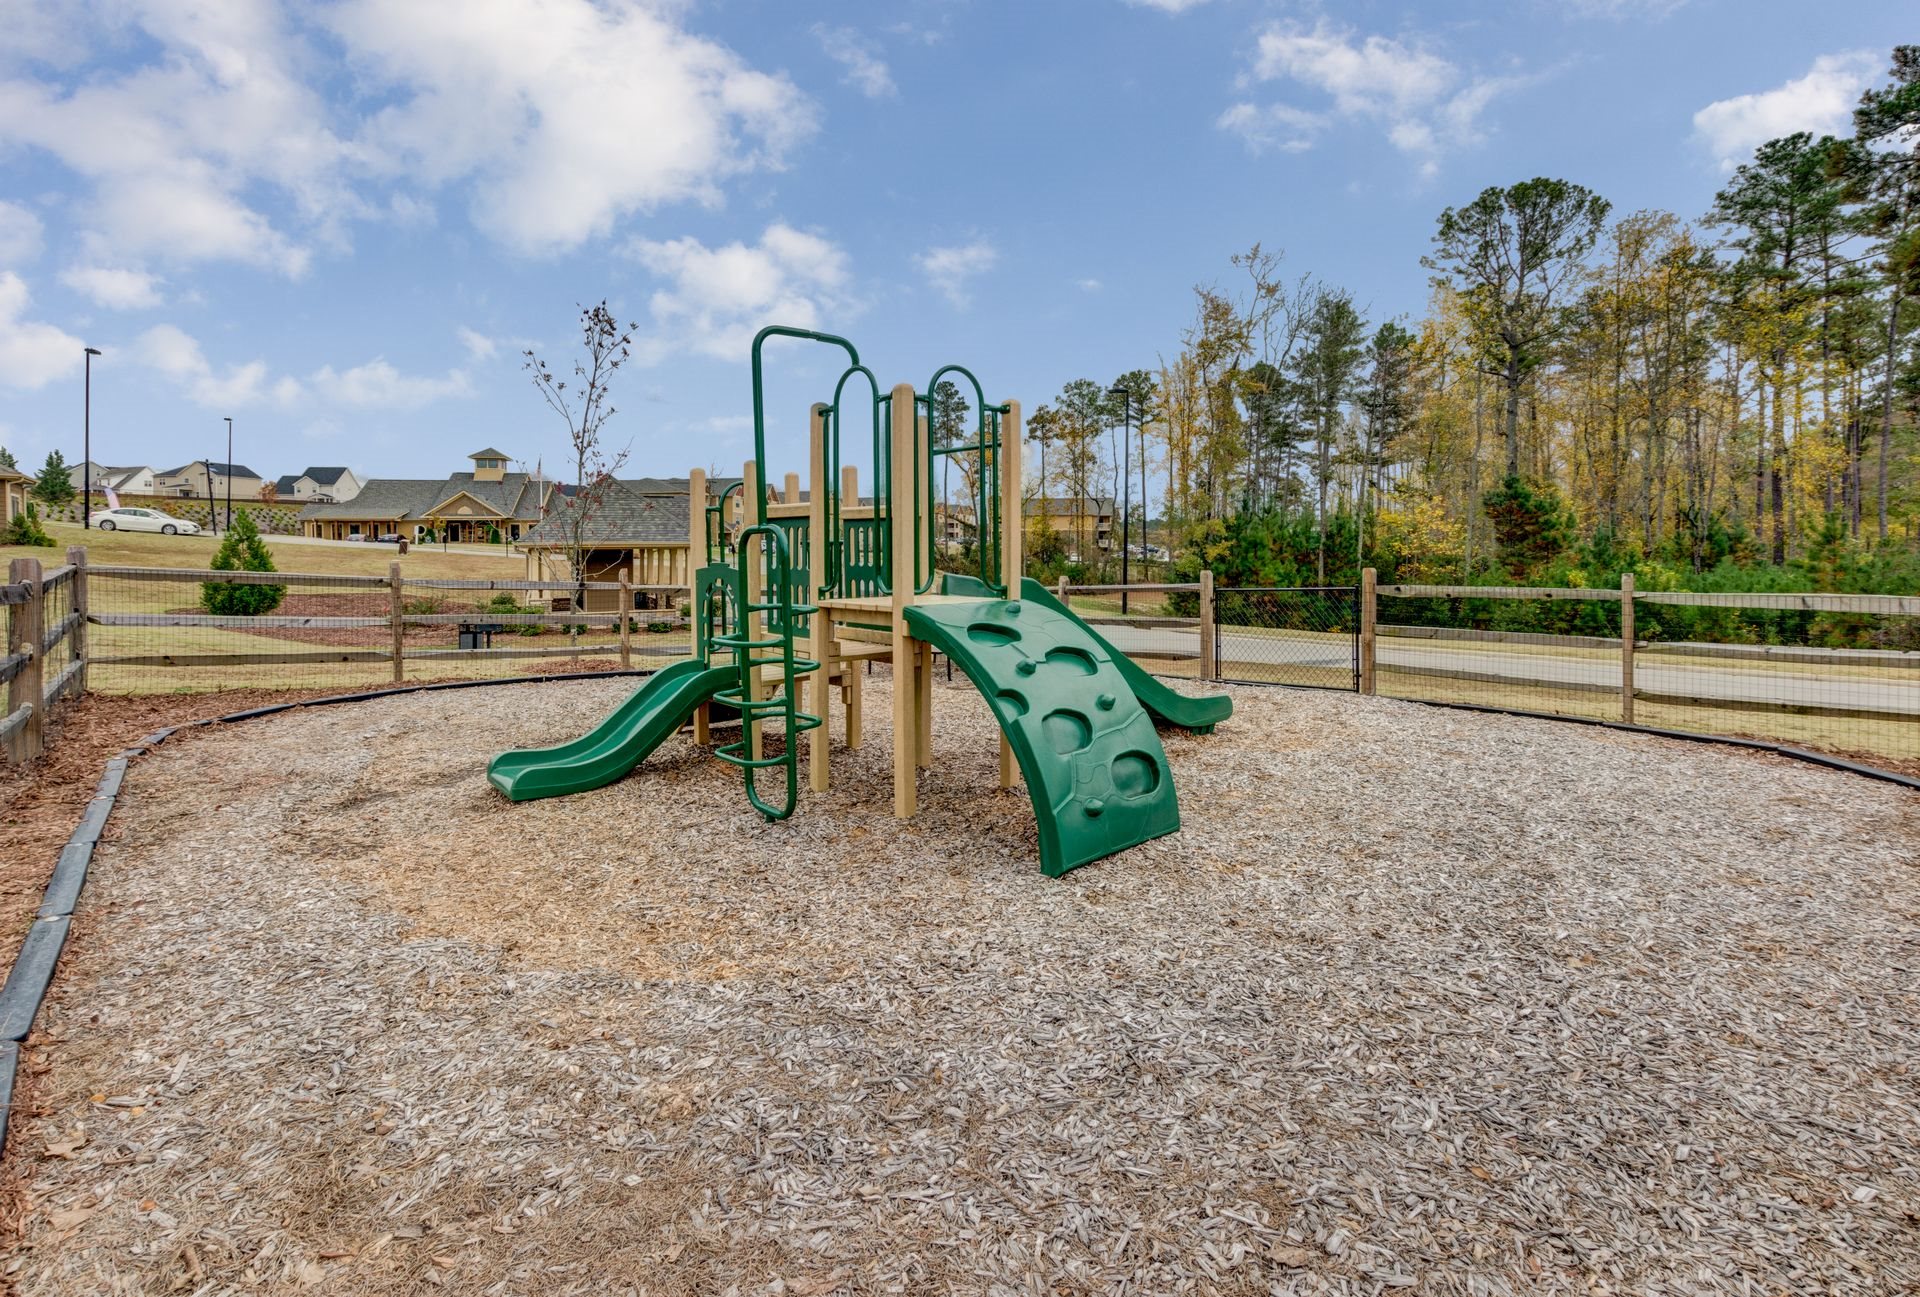 Playground at Ultris Patriot Park, Fayetteville, NC,28311